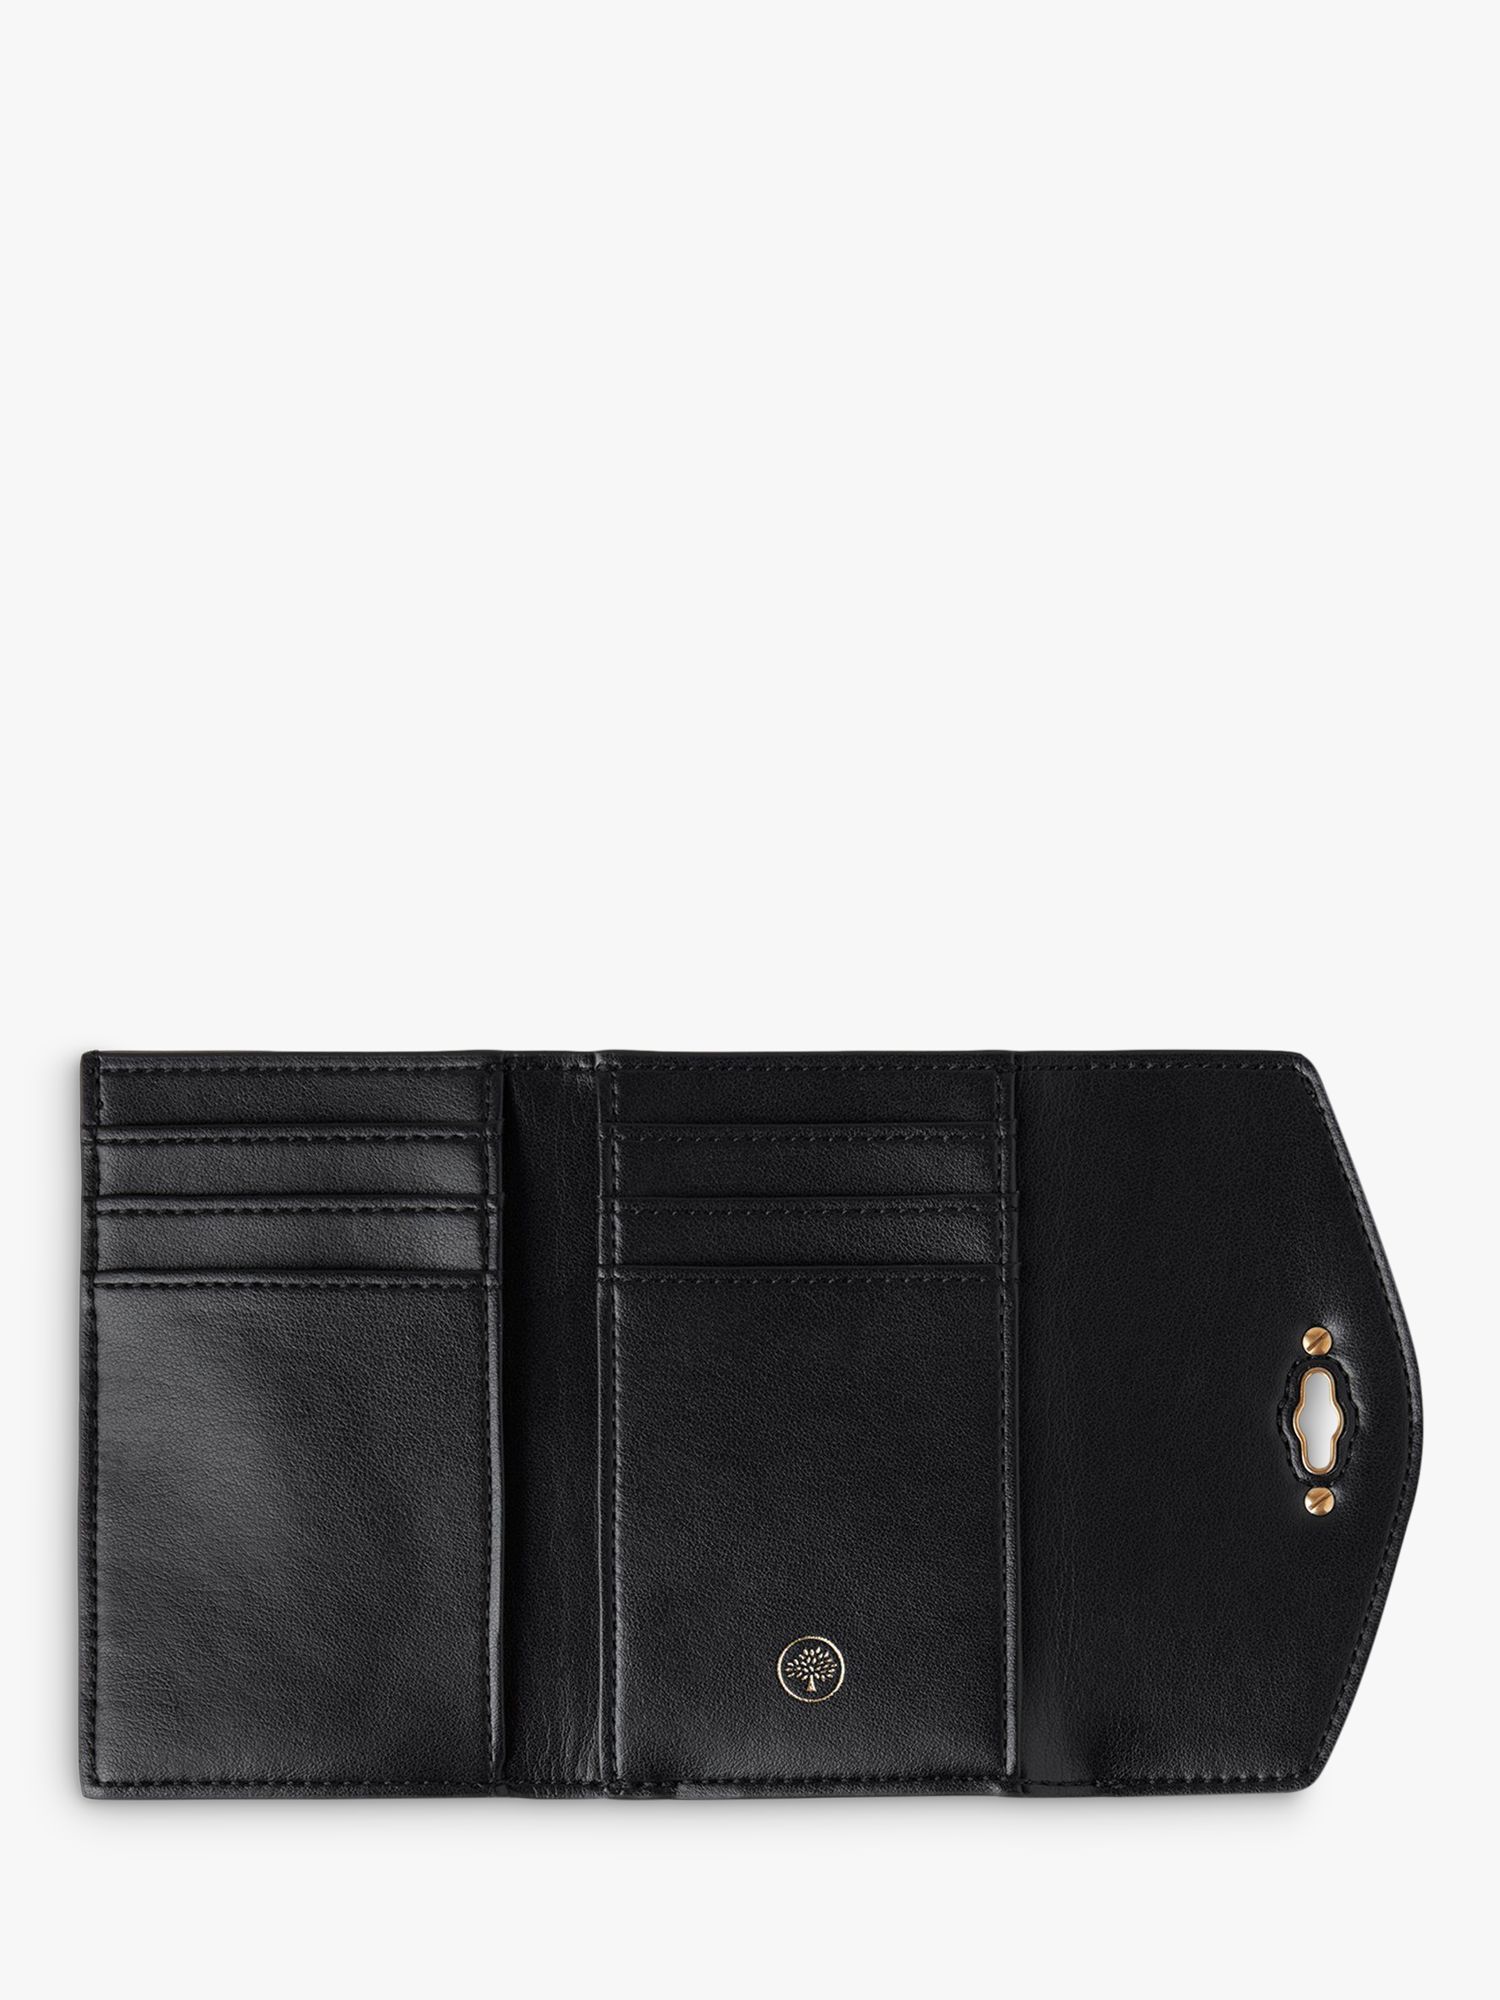 Buy Mulberry Darley Folded Multi-Card Micro Classic Grain Leather Wallet Online at johnlewis.com